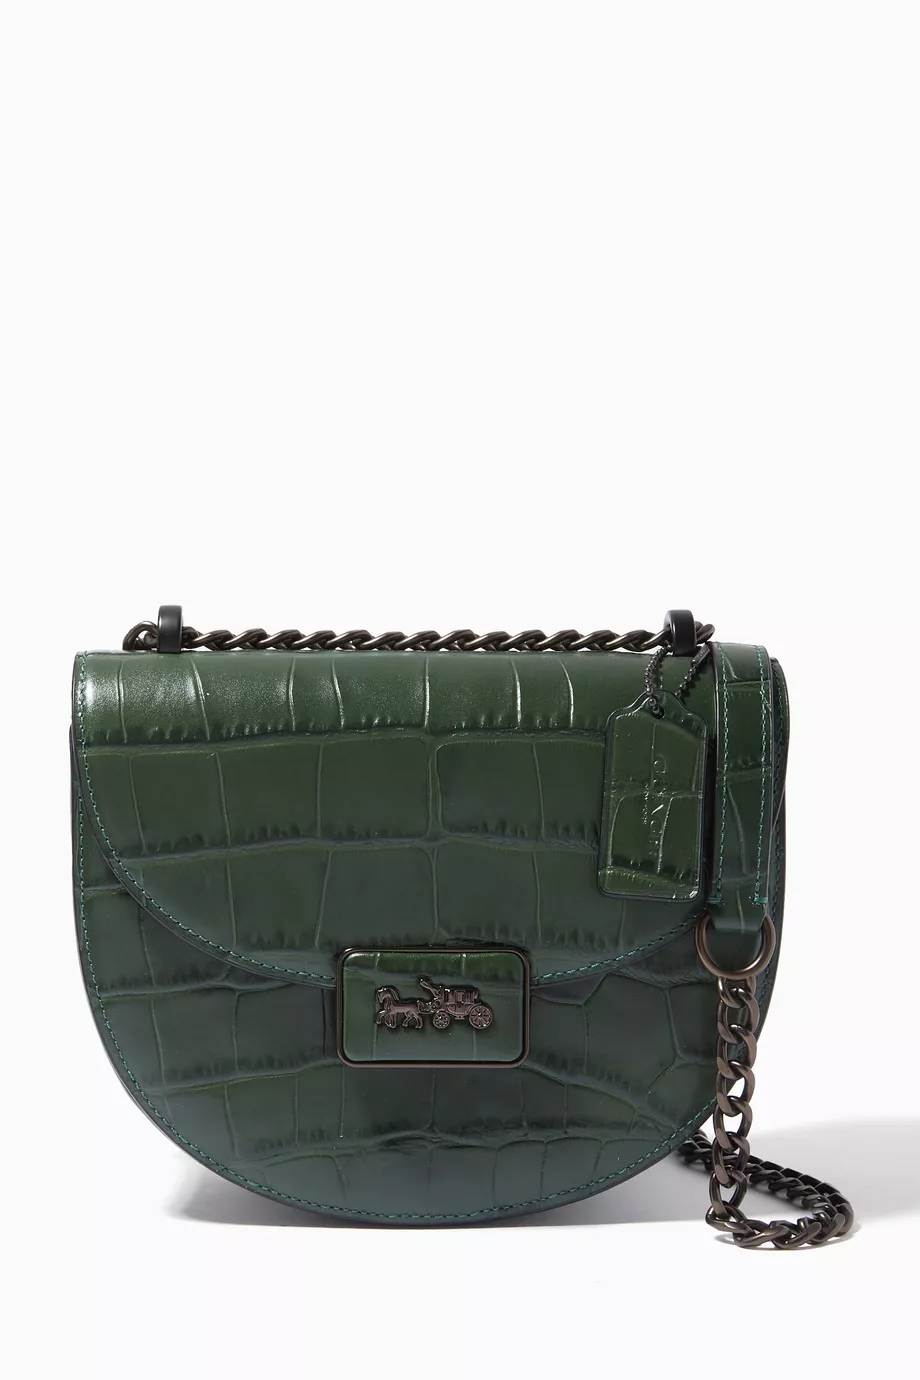 Shop Coach Green Alie Saddle Bag in Croc-embossed Leather for WOMEN |  Ounass Bahrain